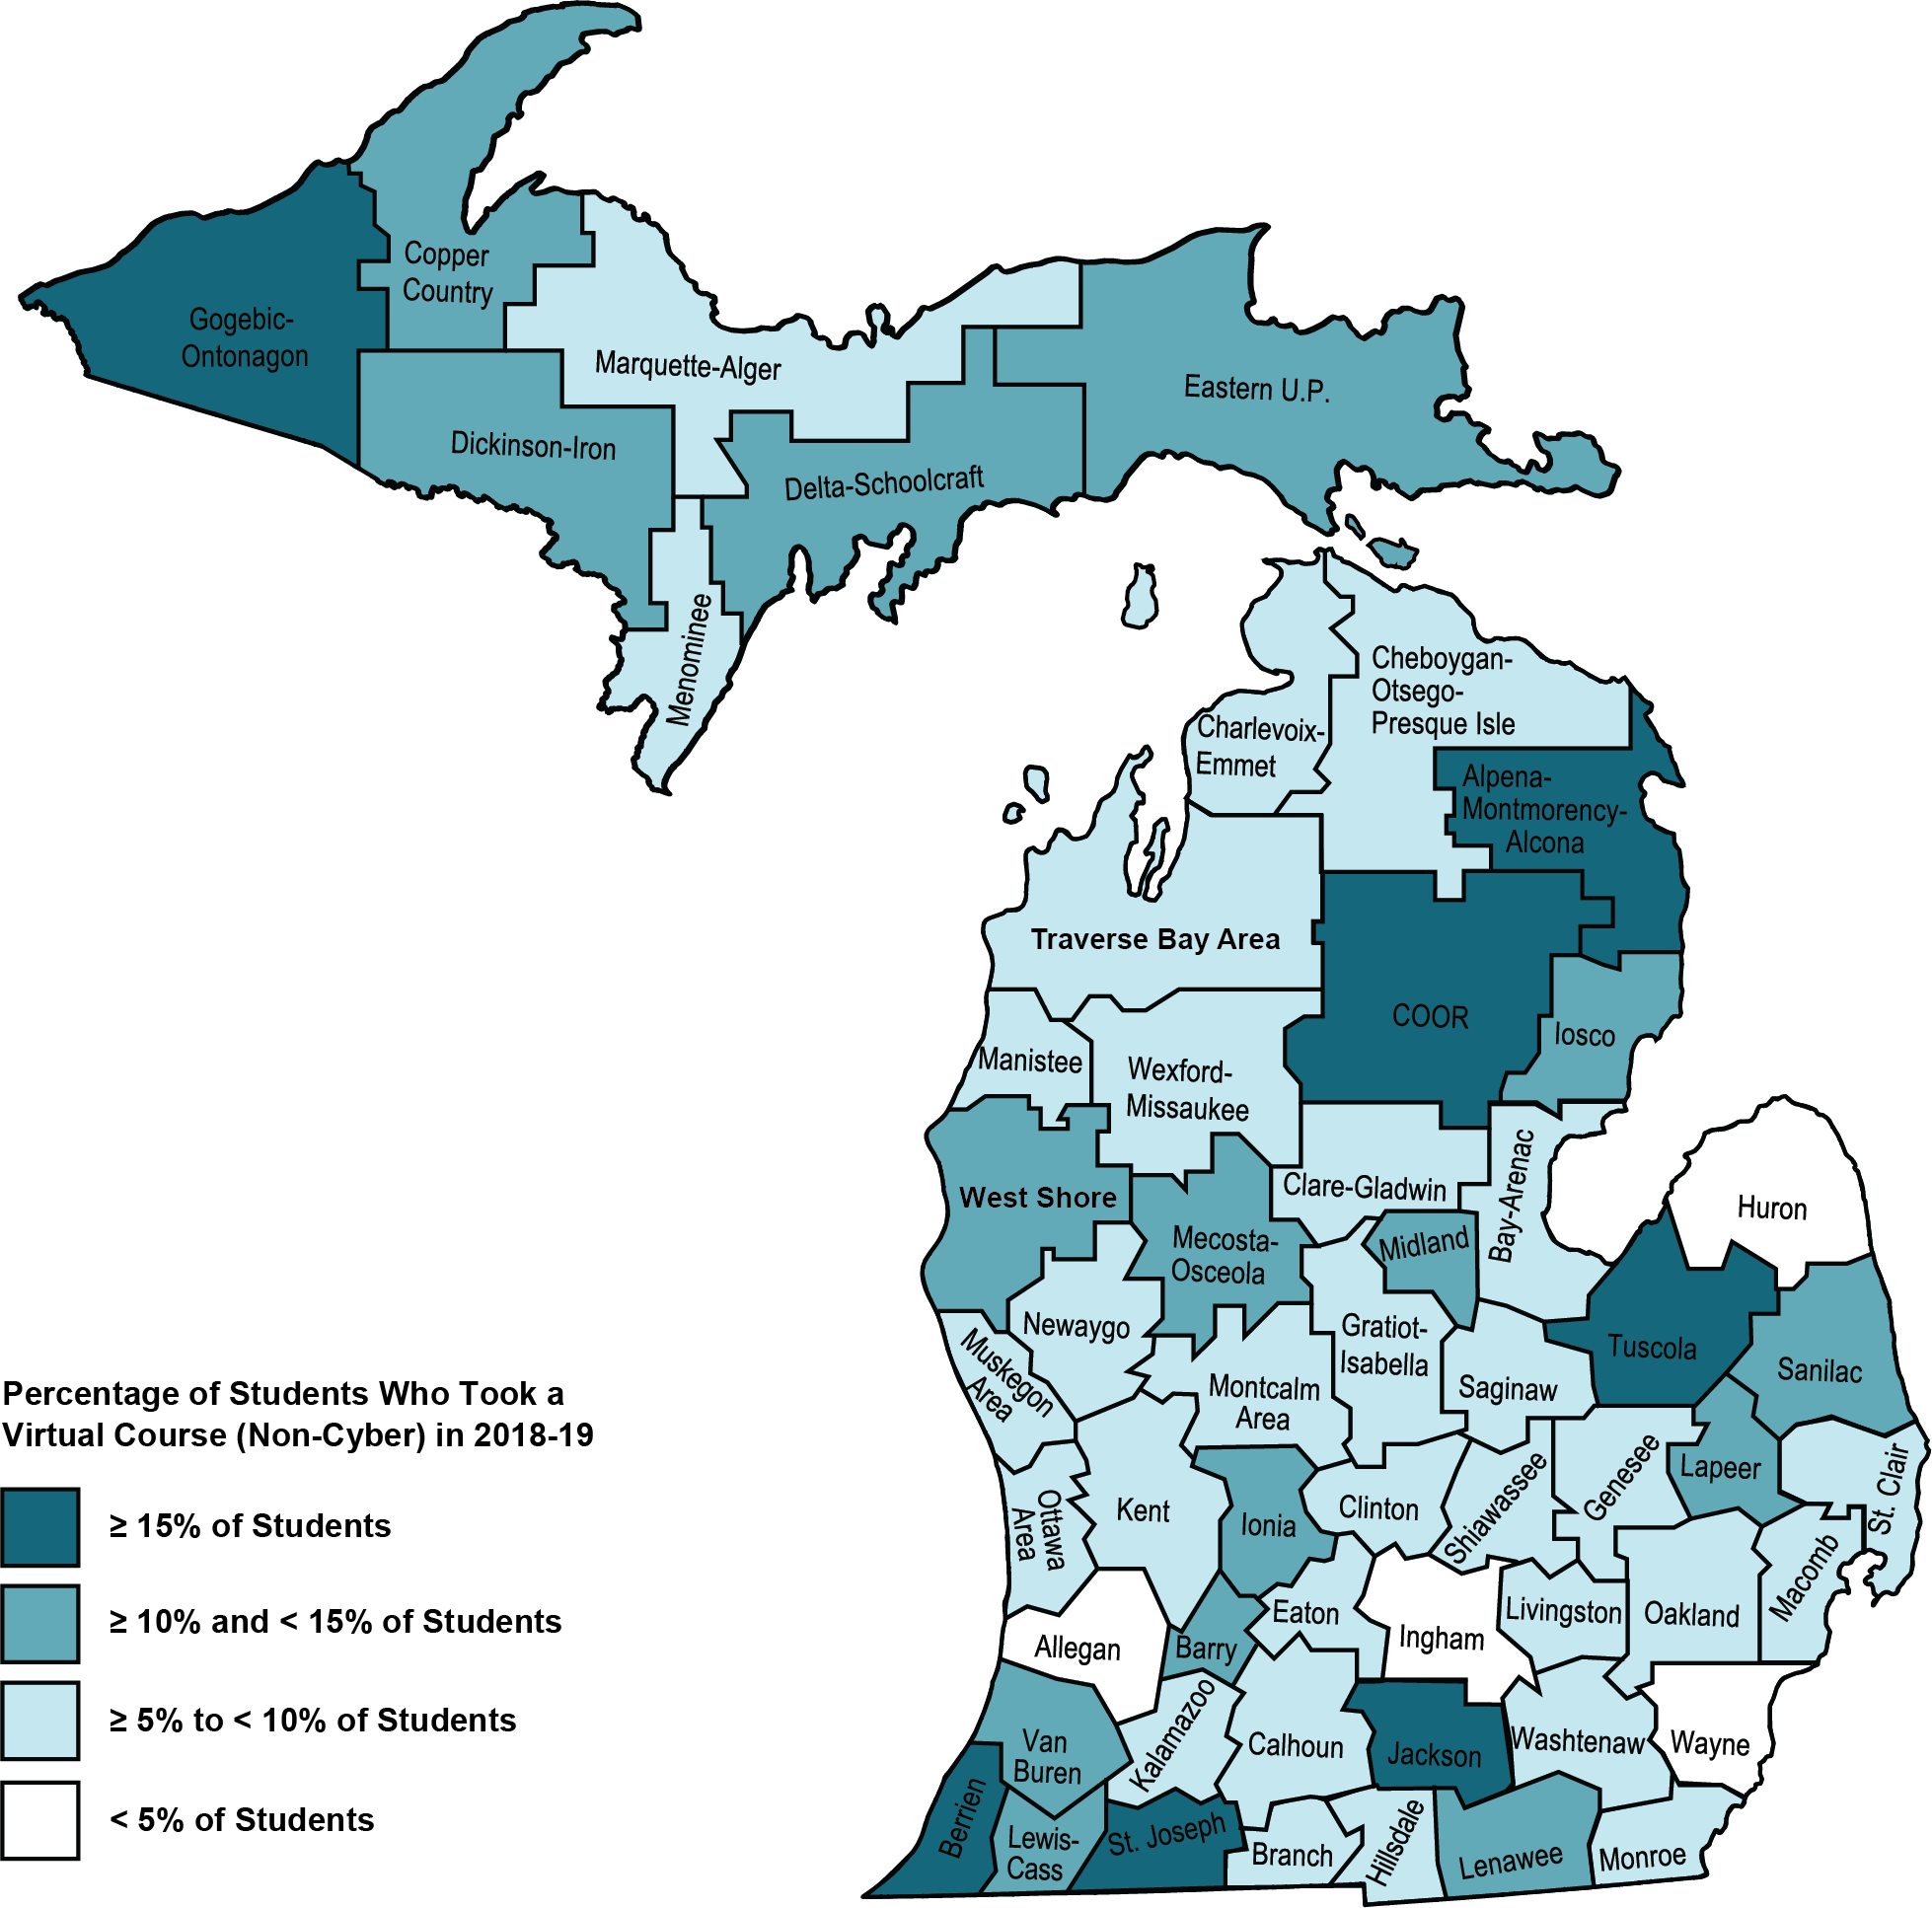 Map shows Michigan ISDs colored by the percentage of students who took at least one virtual courses. All but four ISDs have some color of blue meaning they have at least 5% of more of their students taking a virtual course (non-cyber) in 2018-19. In contrast, 22 ISDs had 10% or more of its students with virtual enrollments; see the preceding paragraph for more detail.